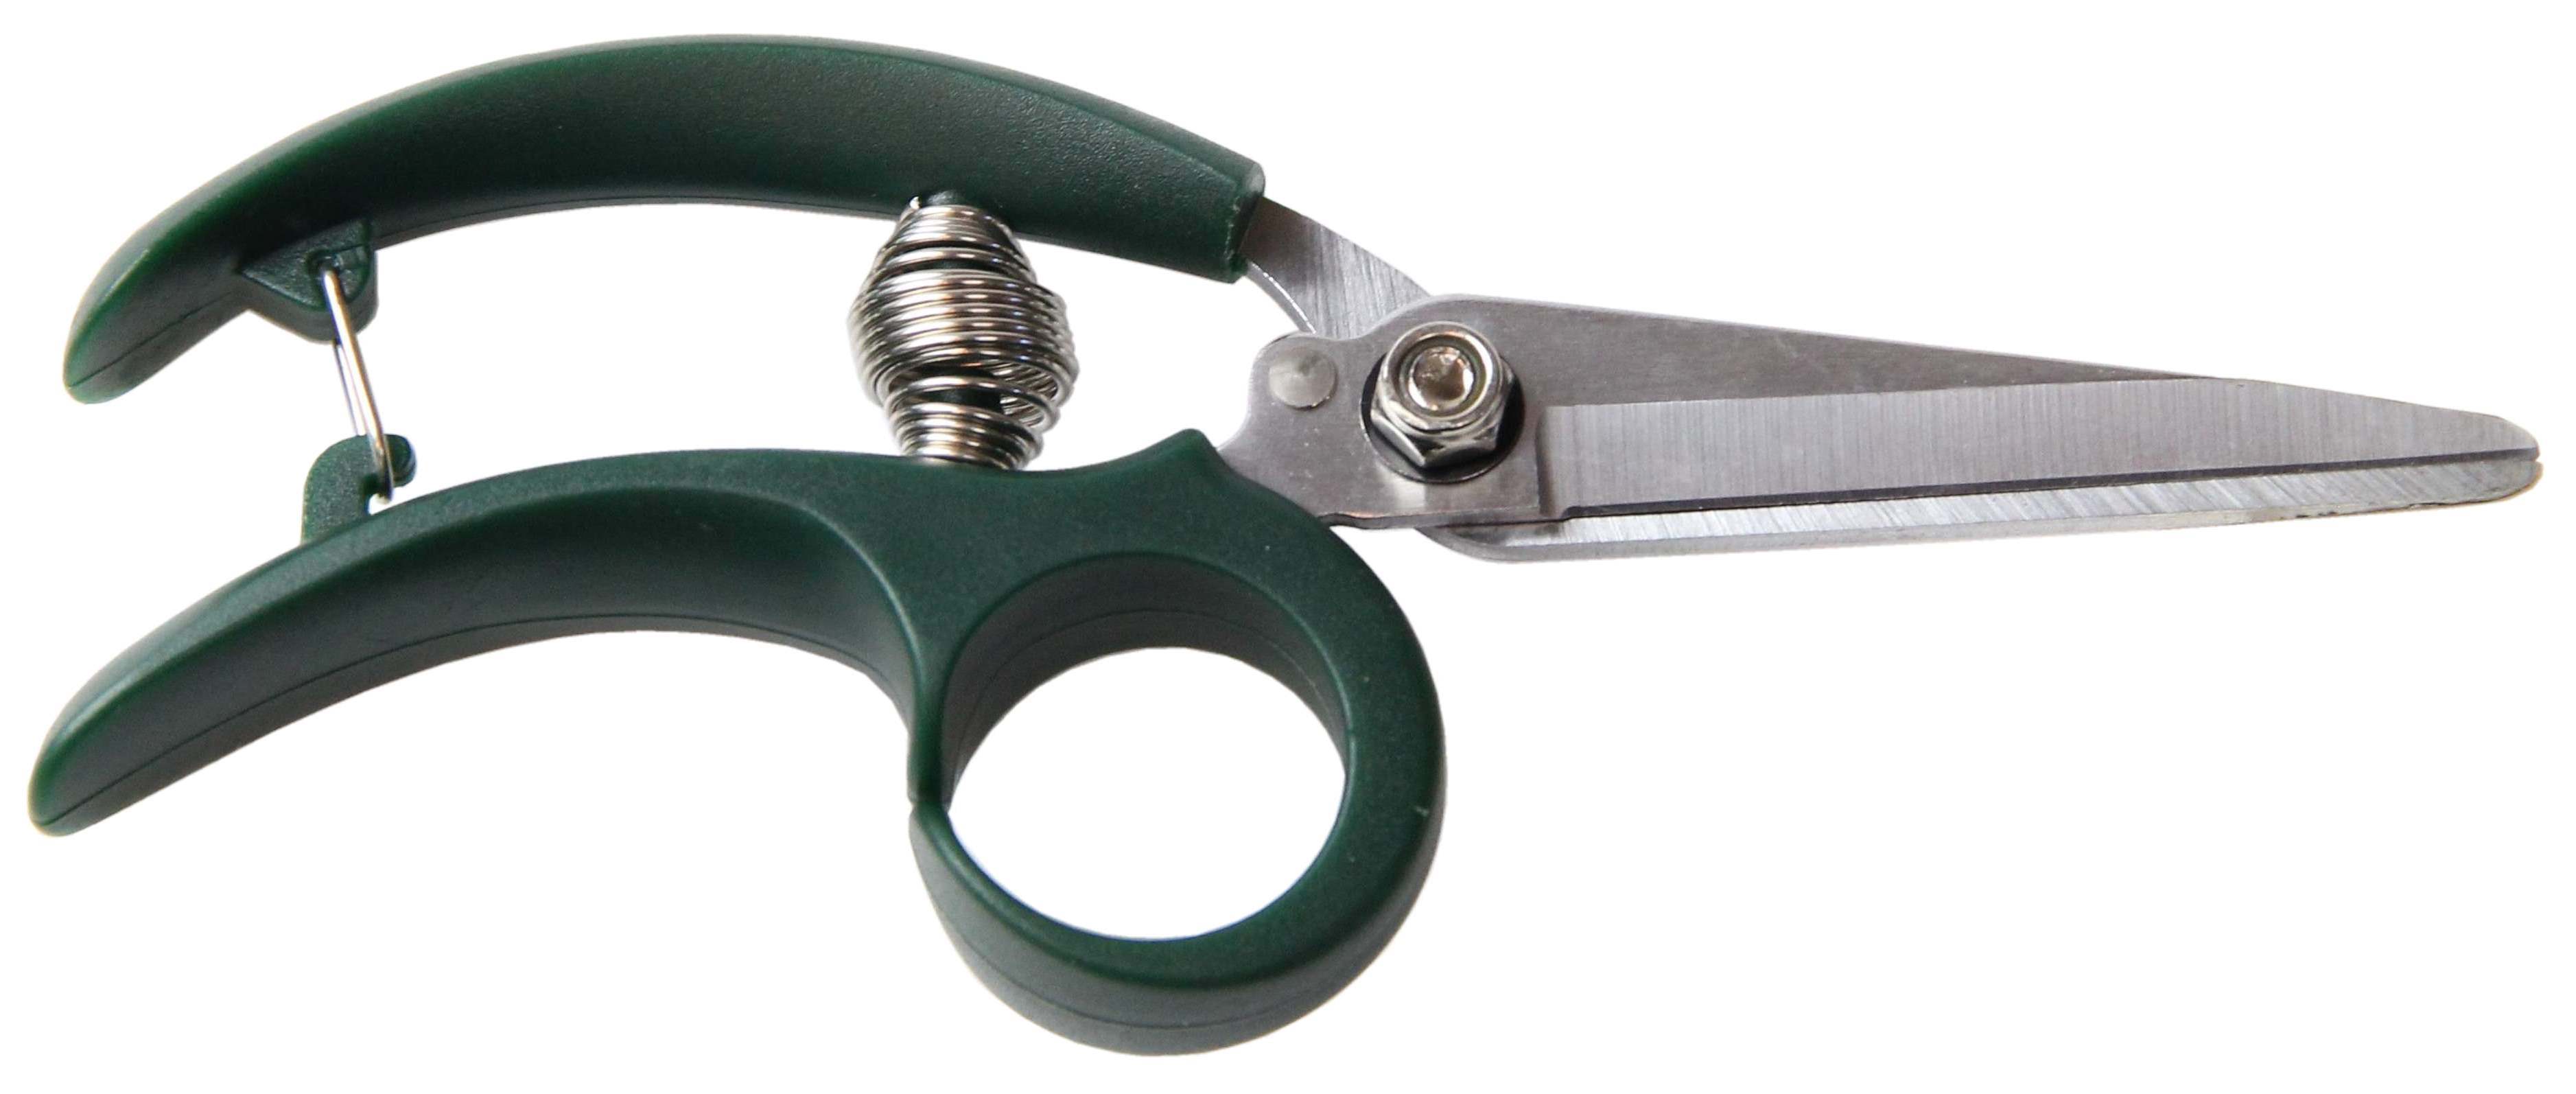 6” Straight Ring Shear(Pruners)